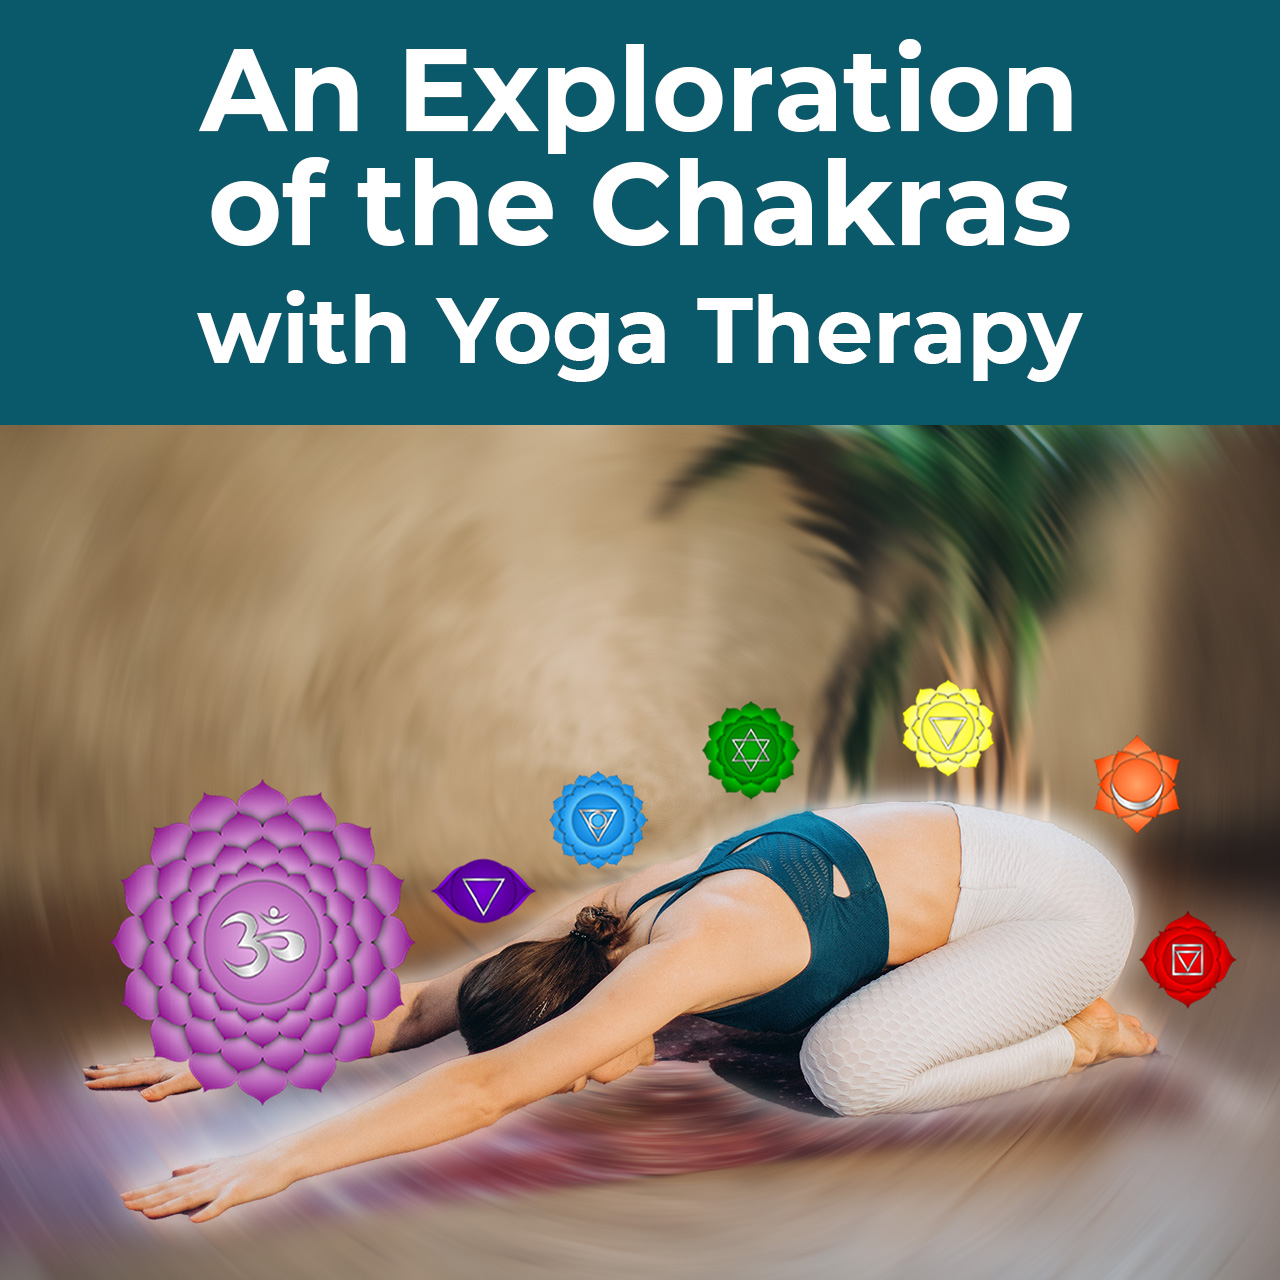 An Exploration of the Chakras with Yoga Therapy